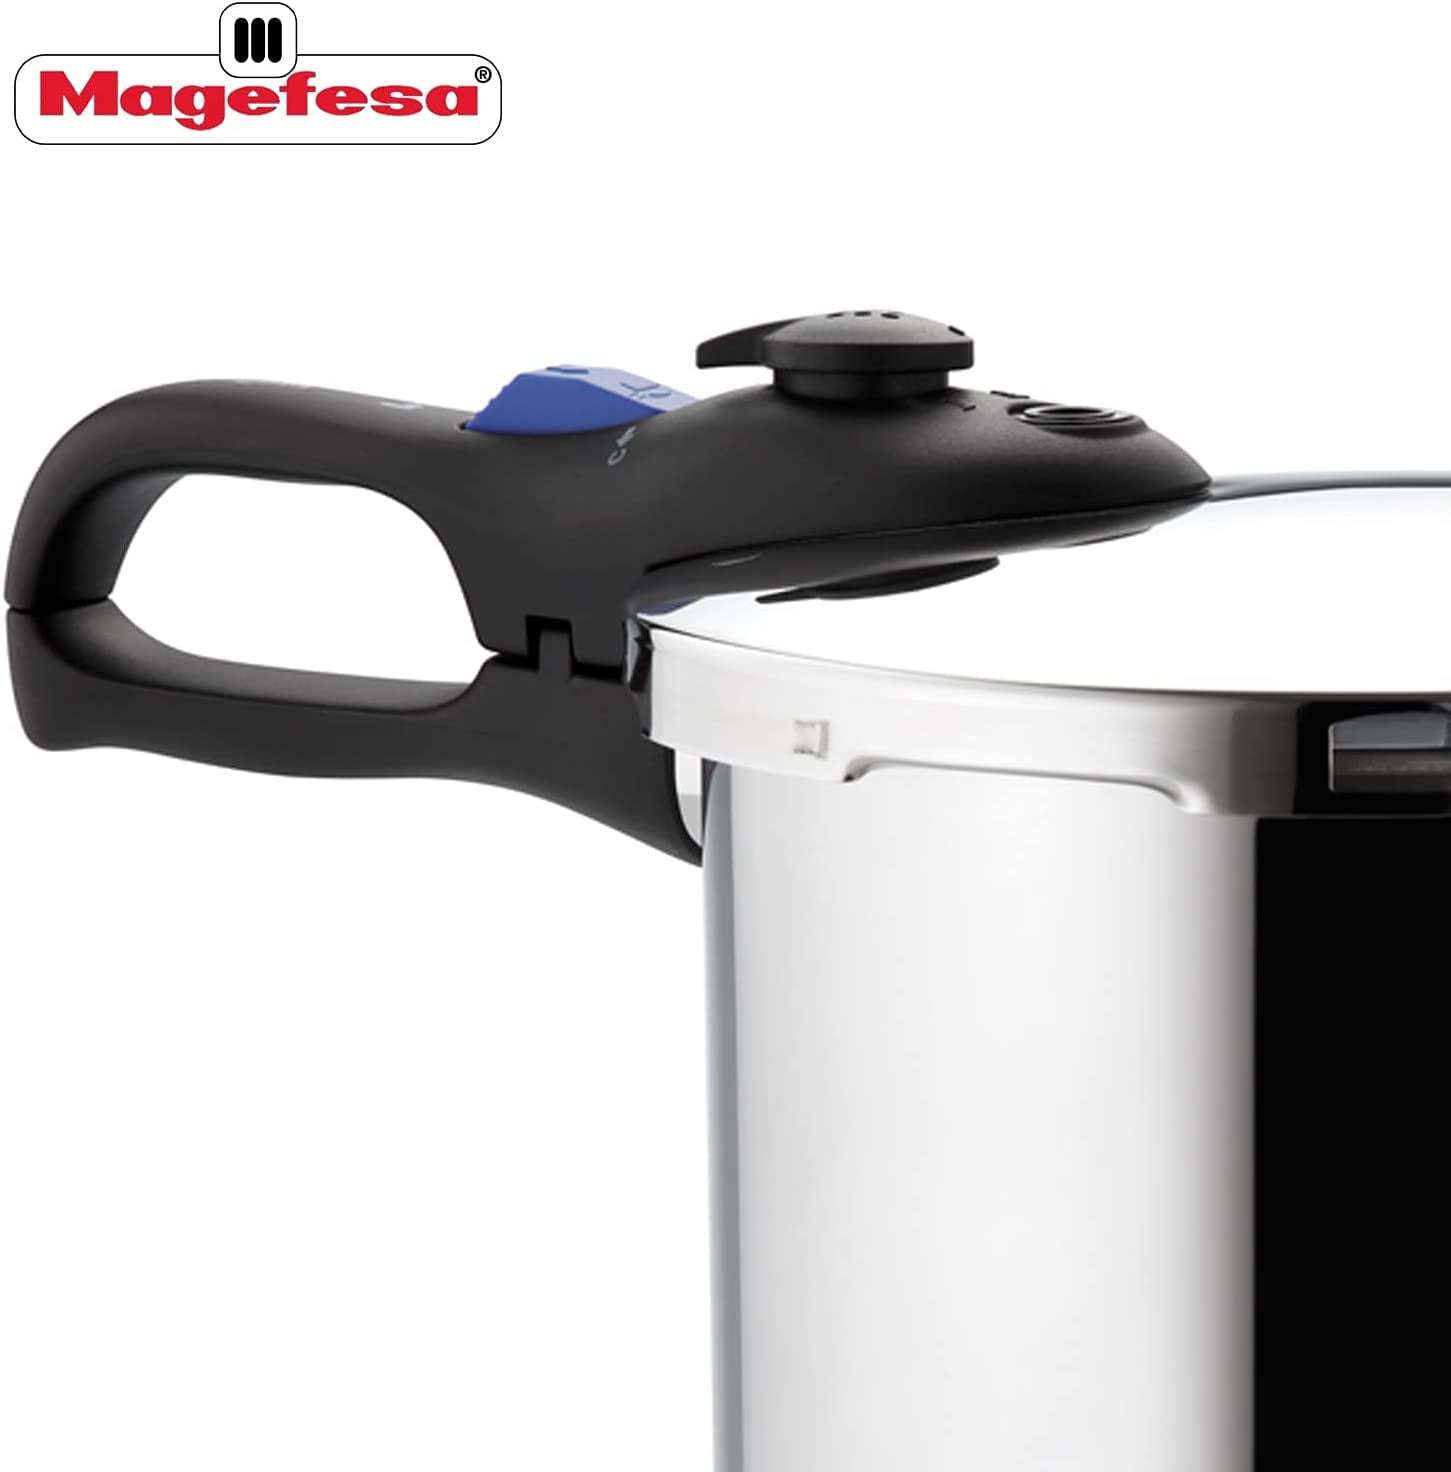 Magefesa Pressure Cooker 8L/Qt - household items - by owner